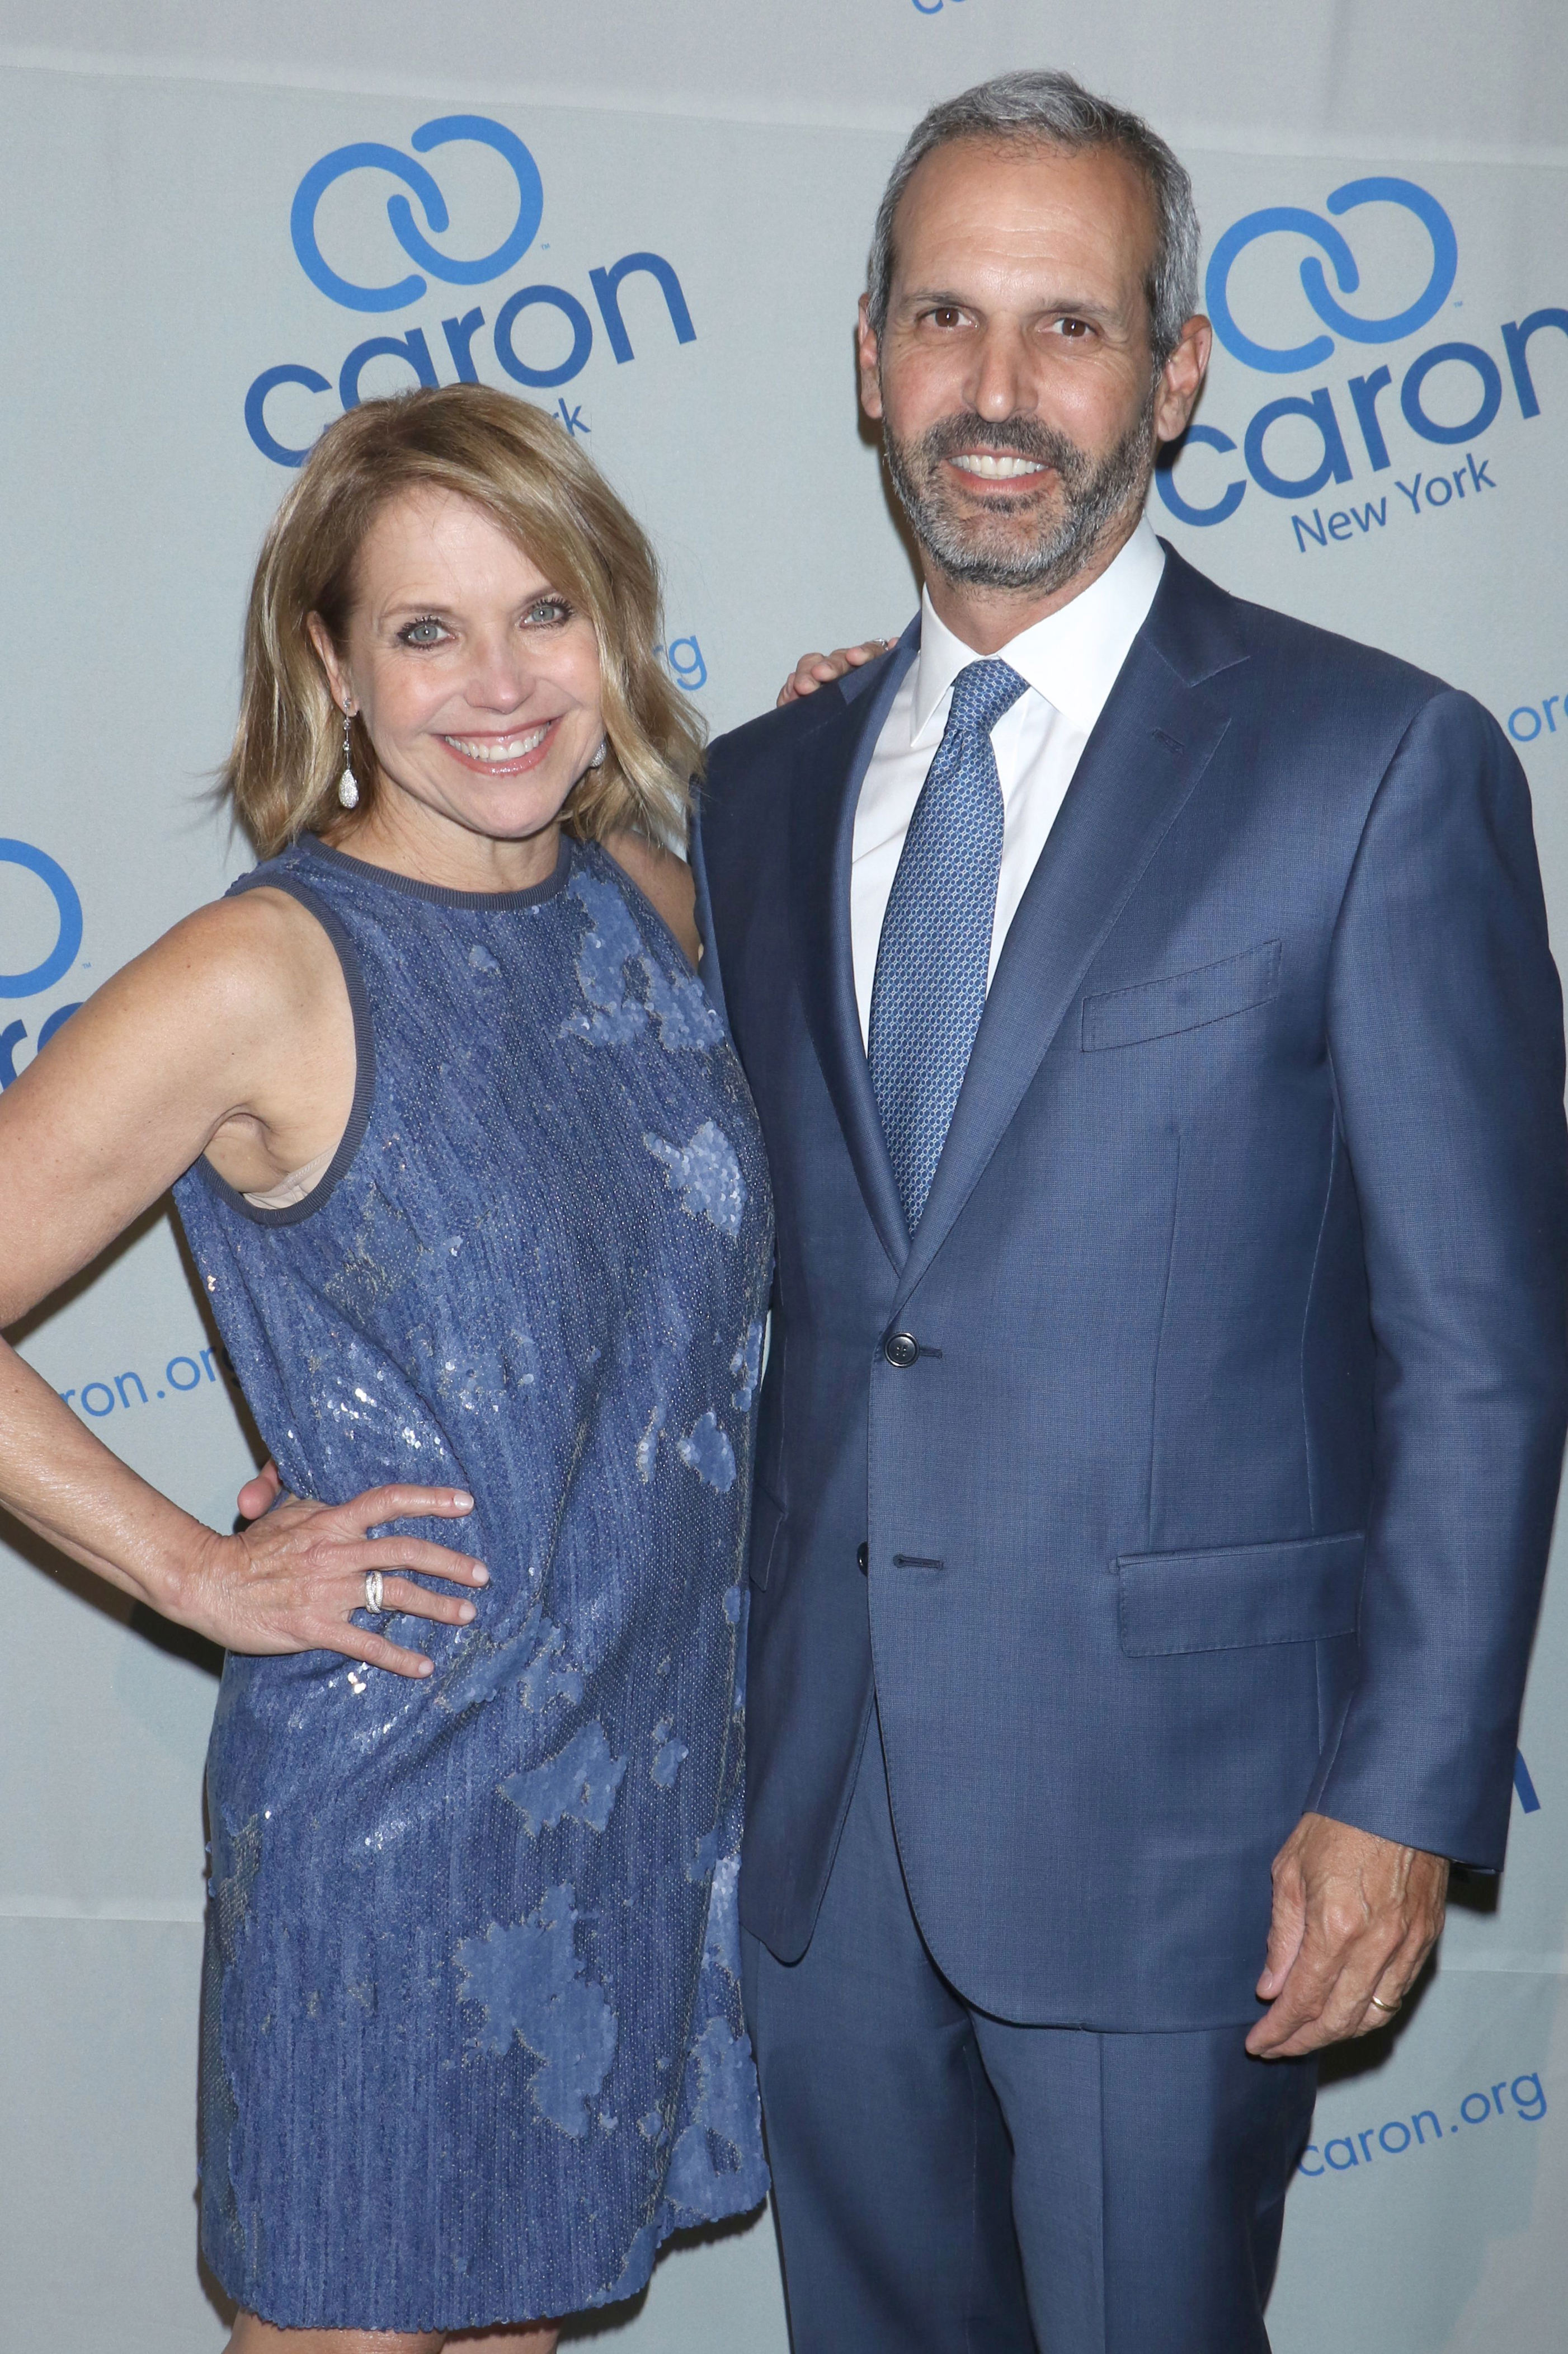 <p>Katie Couric met the man who would become her second husband in 2012. "I was single again and I asked a friend of mine, Molly, whose husband is a trauma surgeon, if her husband knew any other doctors because I thought I'd like to go out with a doctor," the veteran journalist told People TV's "The Jess Cagle Interview" in 2018. "And so she thought about it and she said, 'We don't really know a doctor, but we do know this banker named John Molner.' And I said, 'Does he have a pulse?'" He failed to call so Katie bugged her friend about him and eventually, he phoned her and they set up a date. "He finally asked me out, we met at a restaurant and what can I say? He had me at hello." Katie married John in 2014.</p>